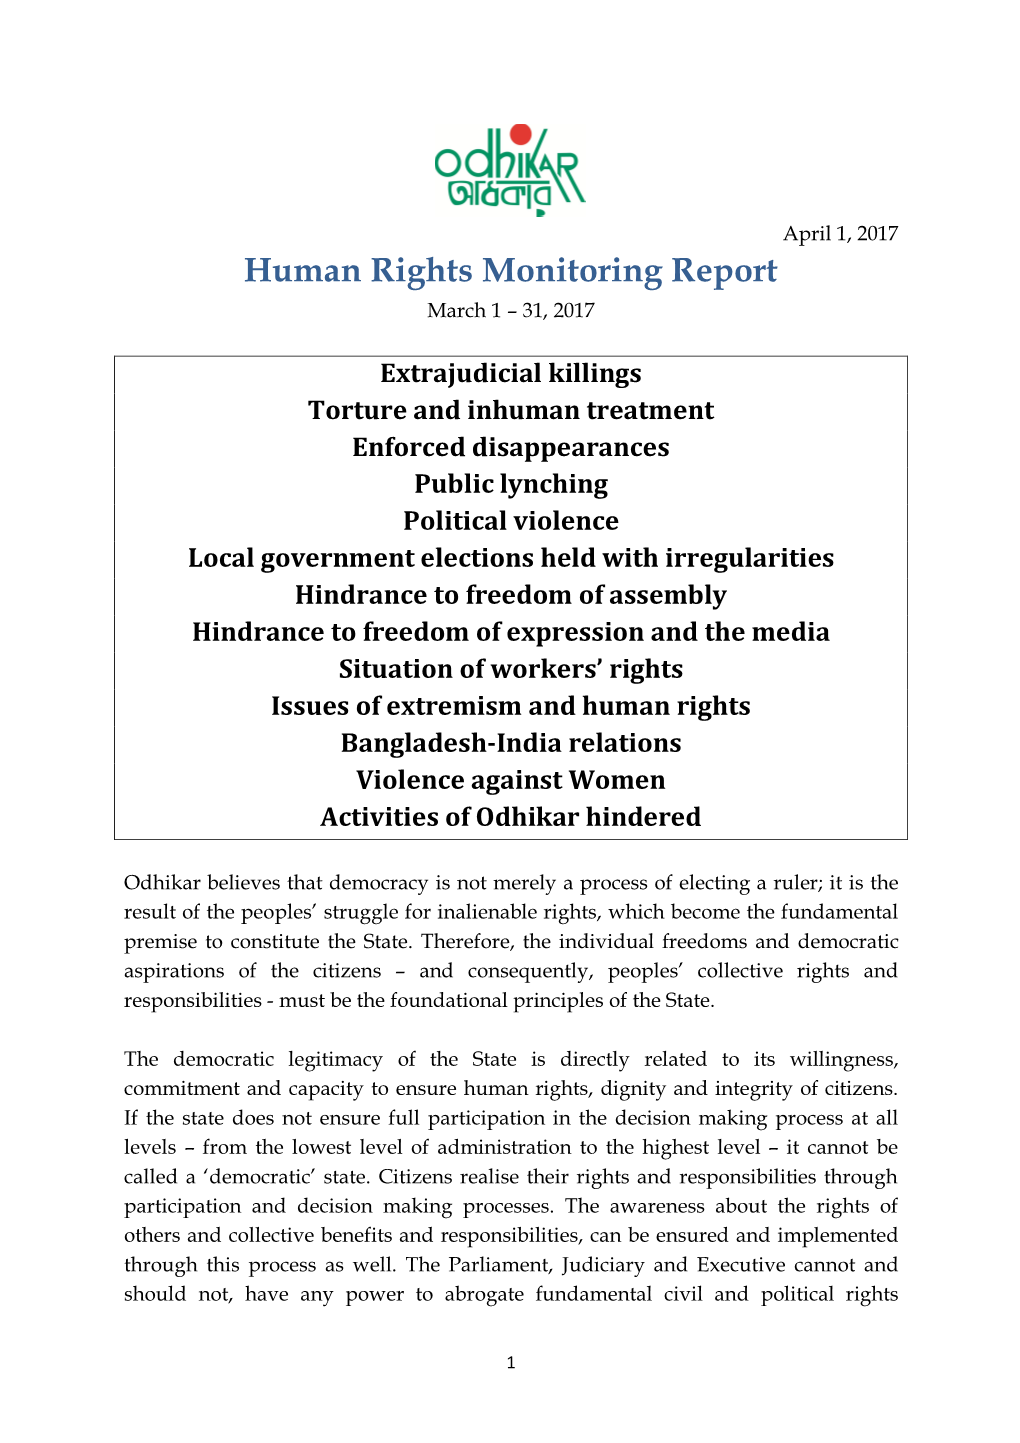 Human Rights Monitoring Report of March 2017, Despite Facing Persecution and Continuous Harassment and Threats to Its Existence Since August 10, 2013